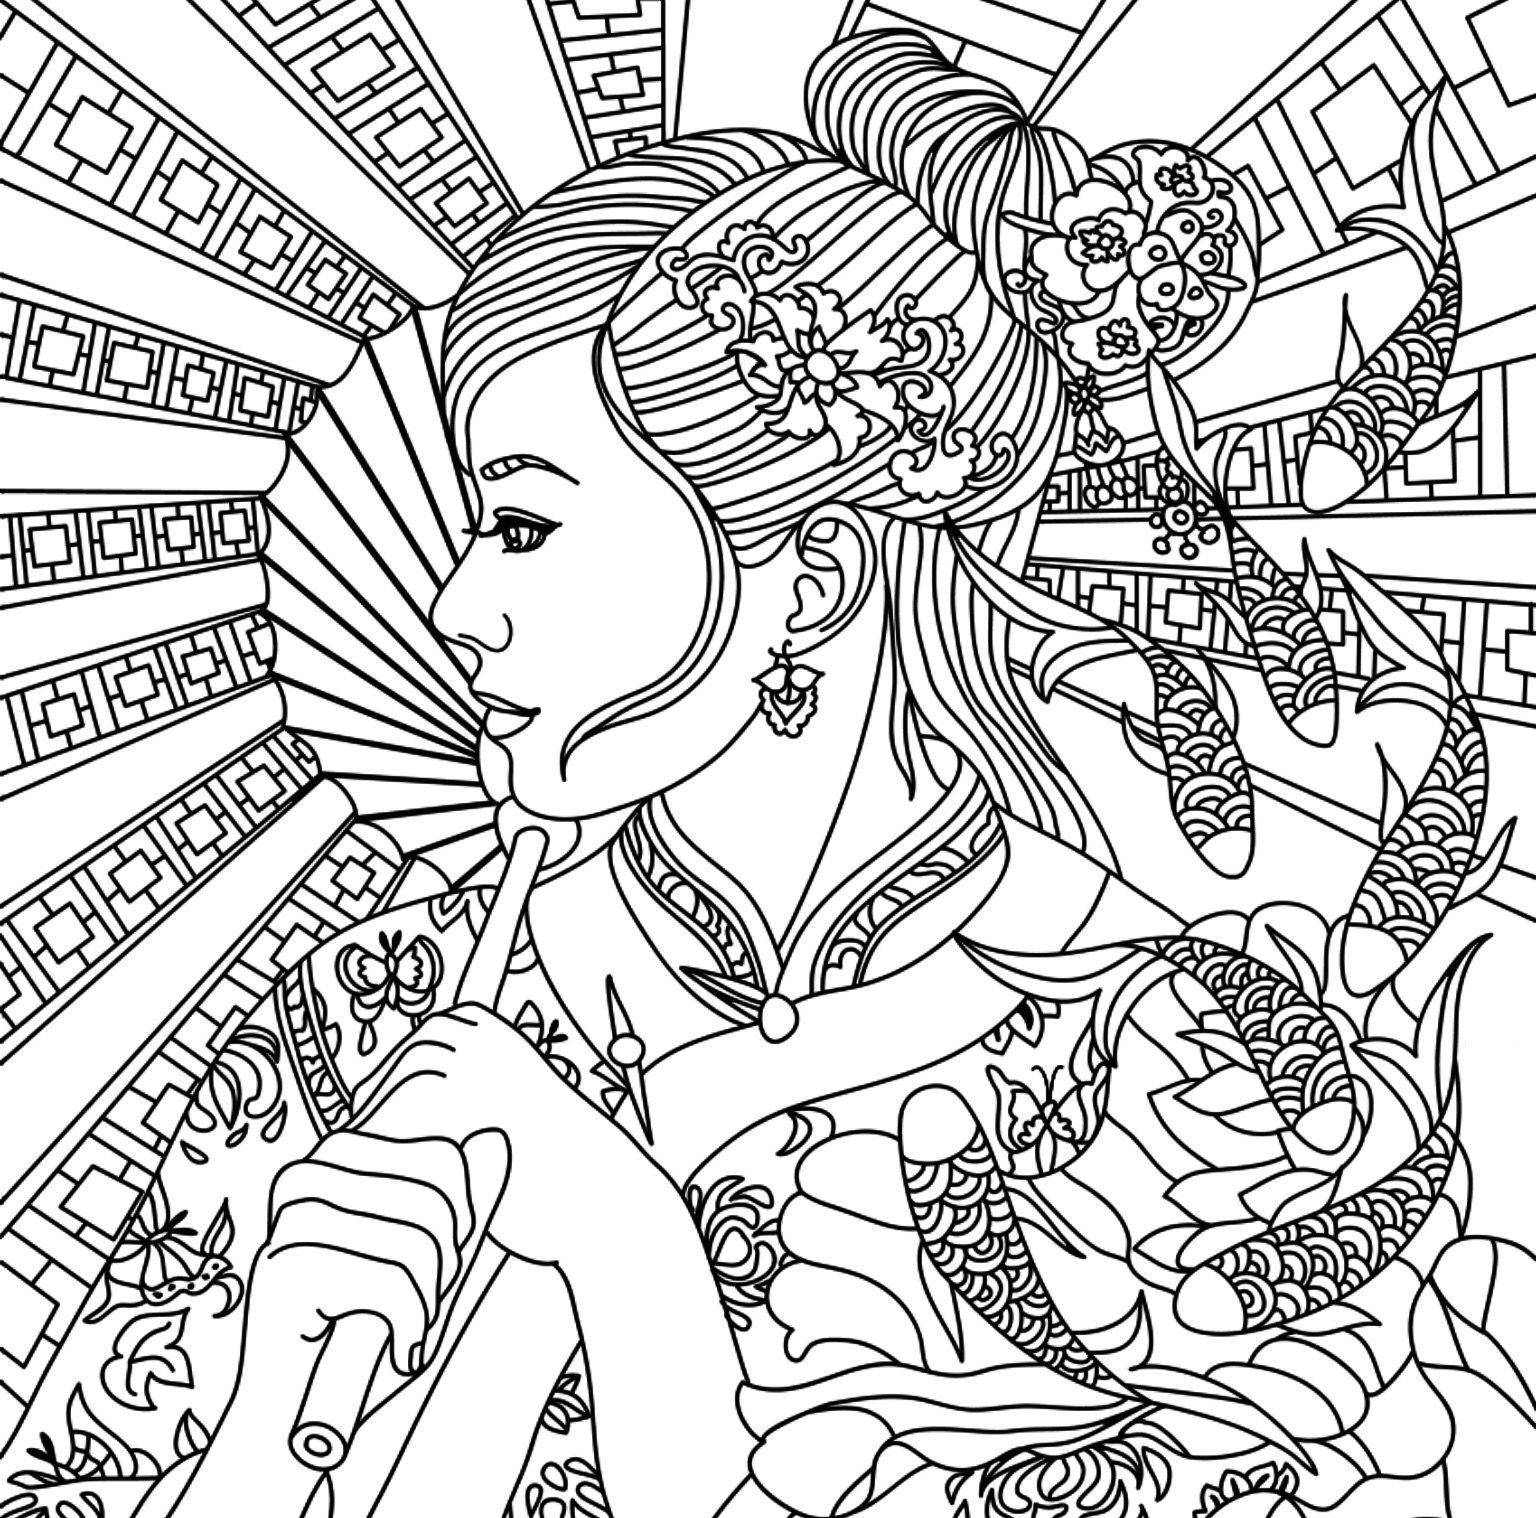 Asian beauty adult coloring page | Mandala coloring pages, Free ...